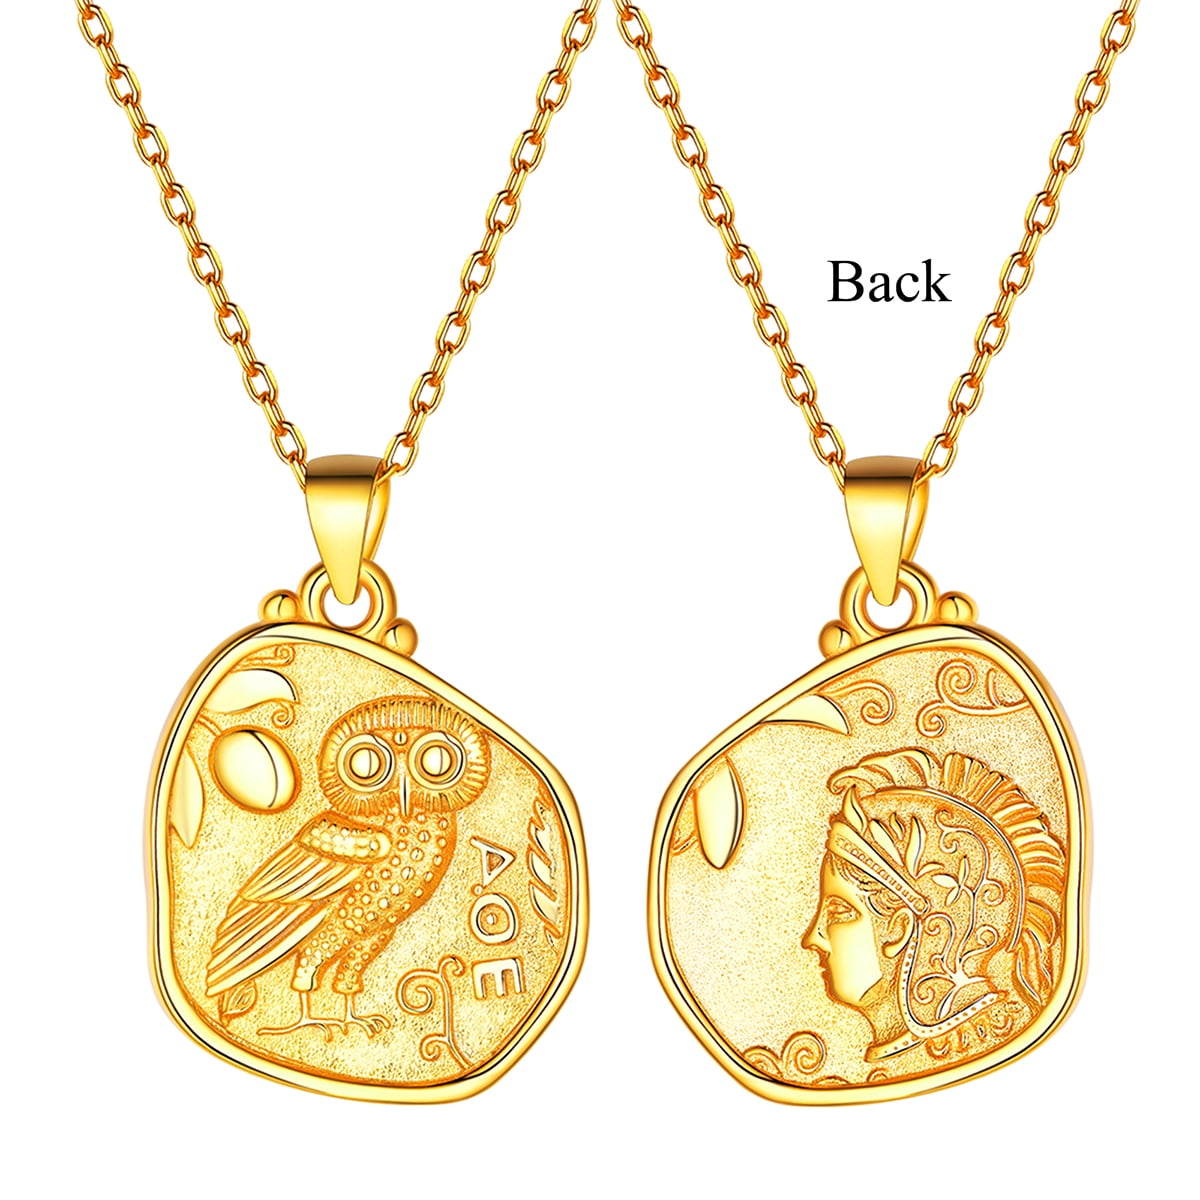 Ancient Athena's Owl Coin Charm -Gold Plated Bronze 24x19mm - 1pc – Plazko